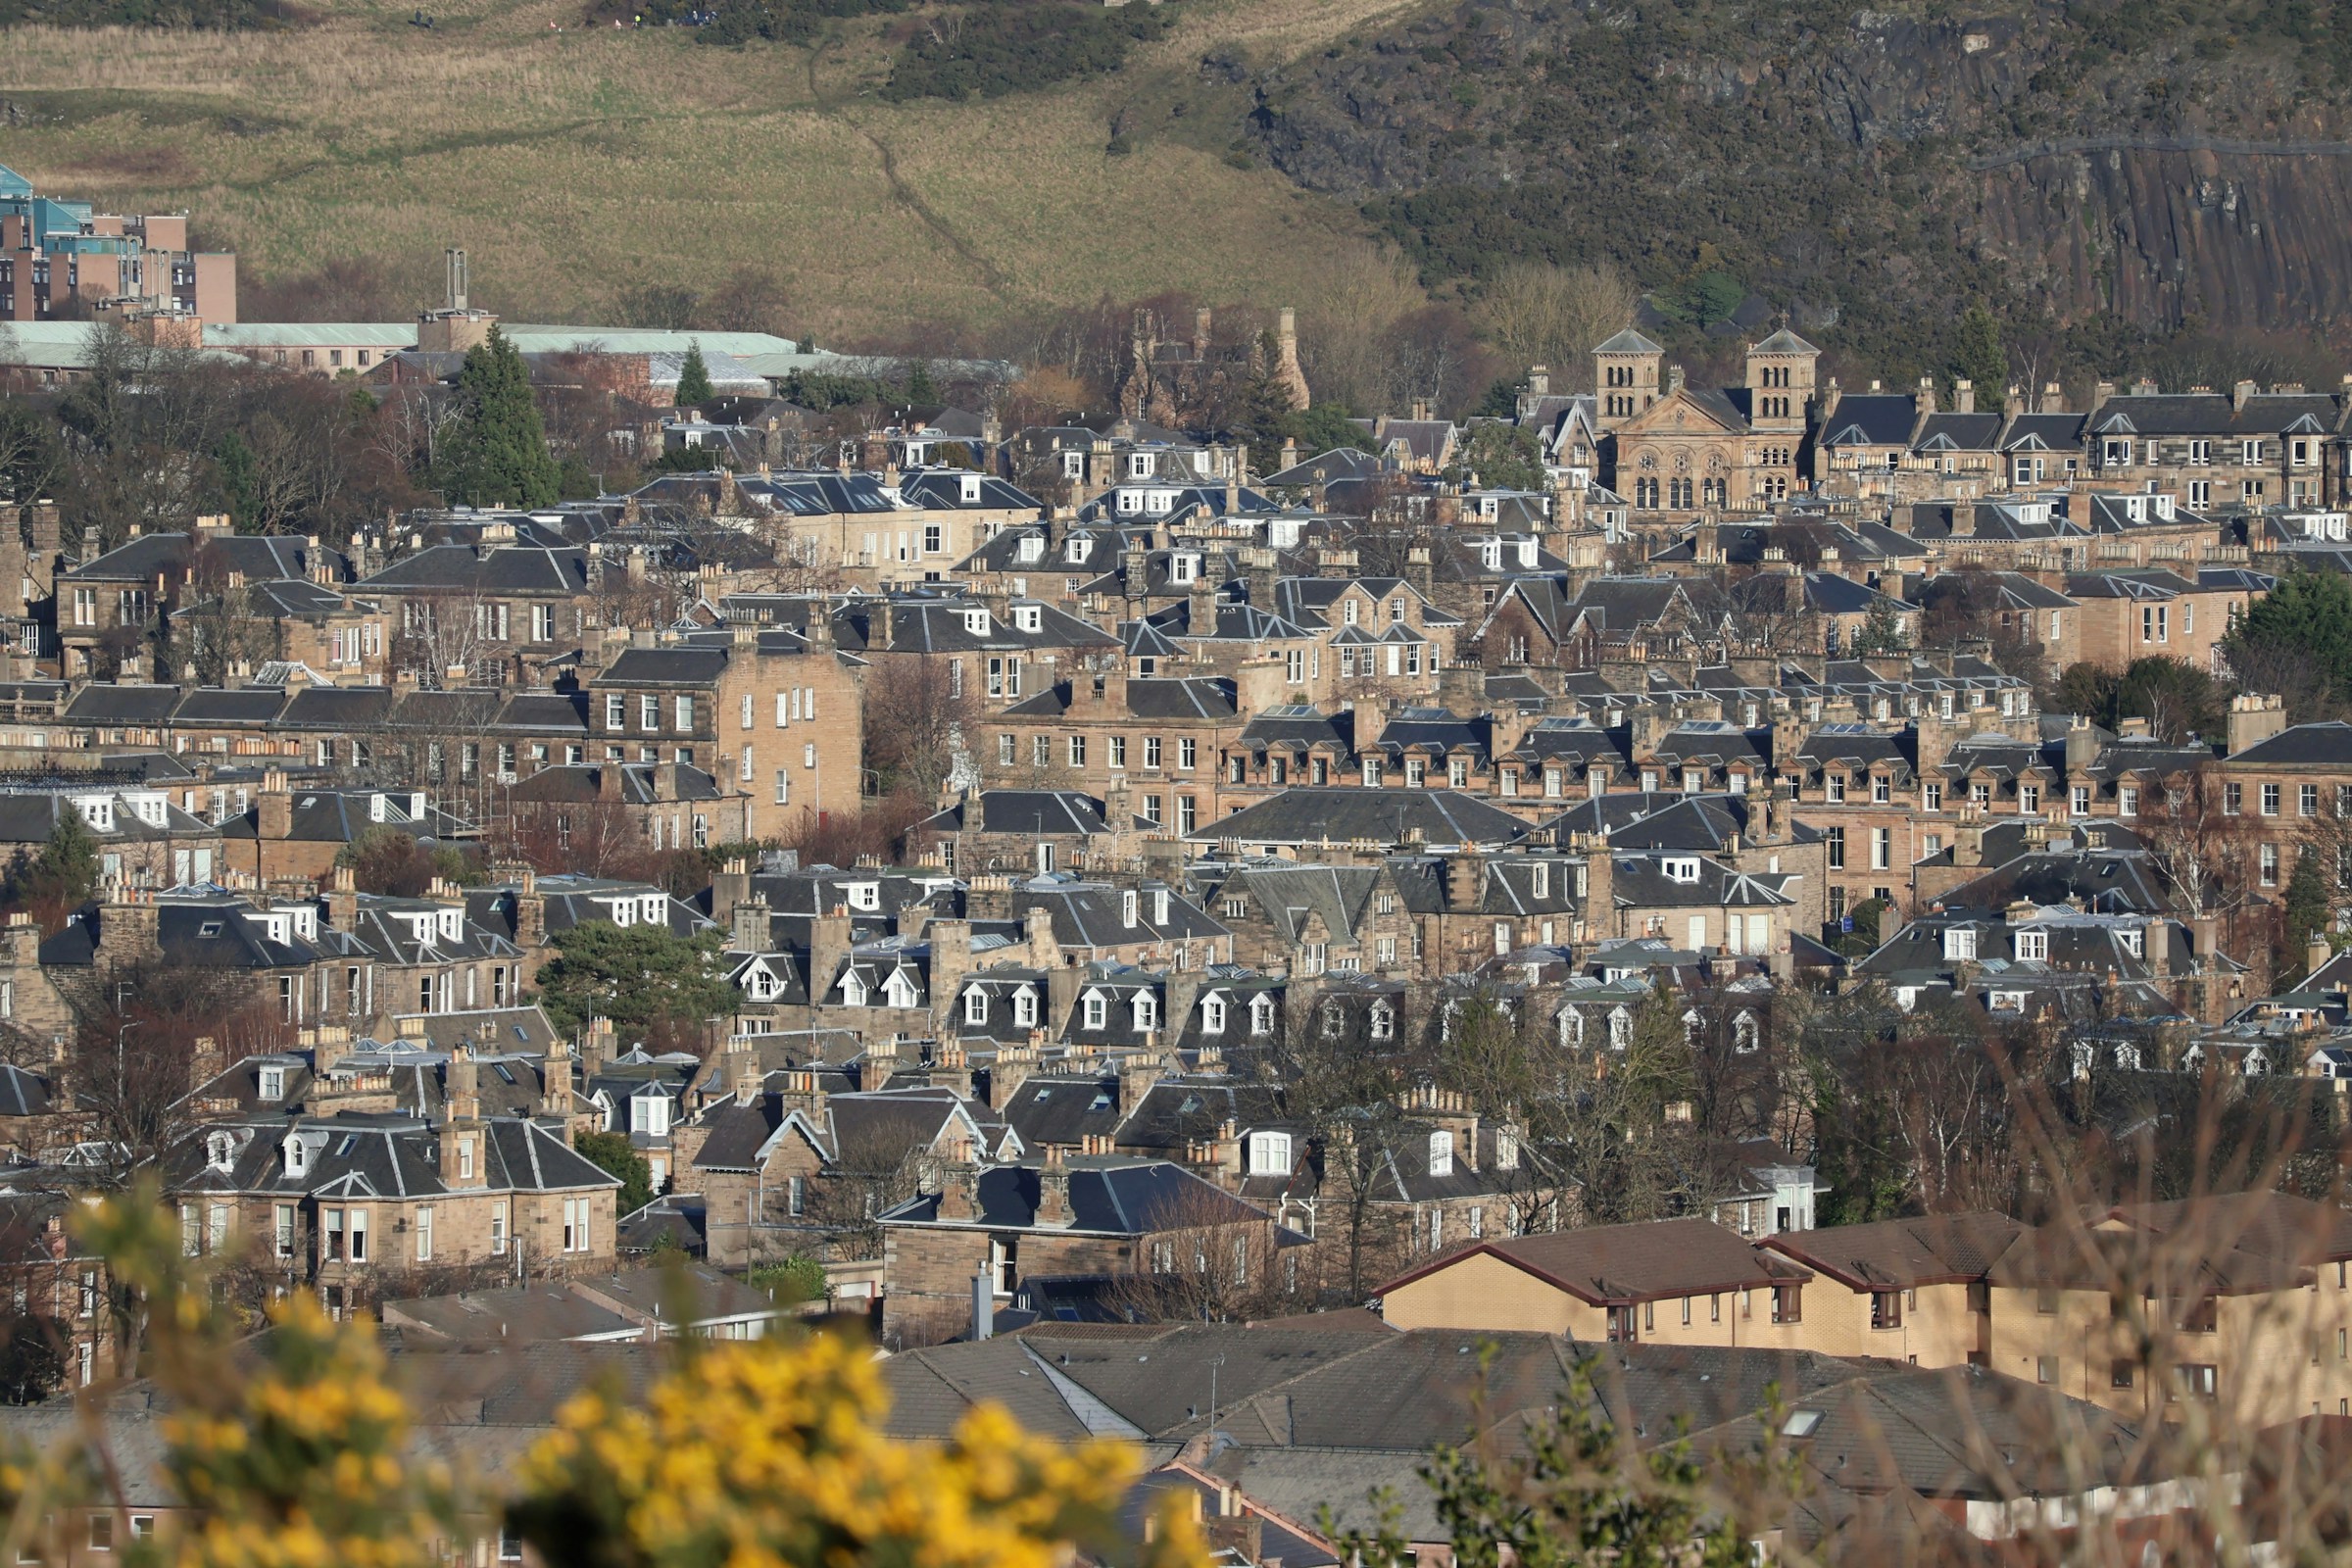 £1bn Plan Submitted for 3,000 Homes in Edinburgh